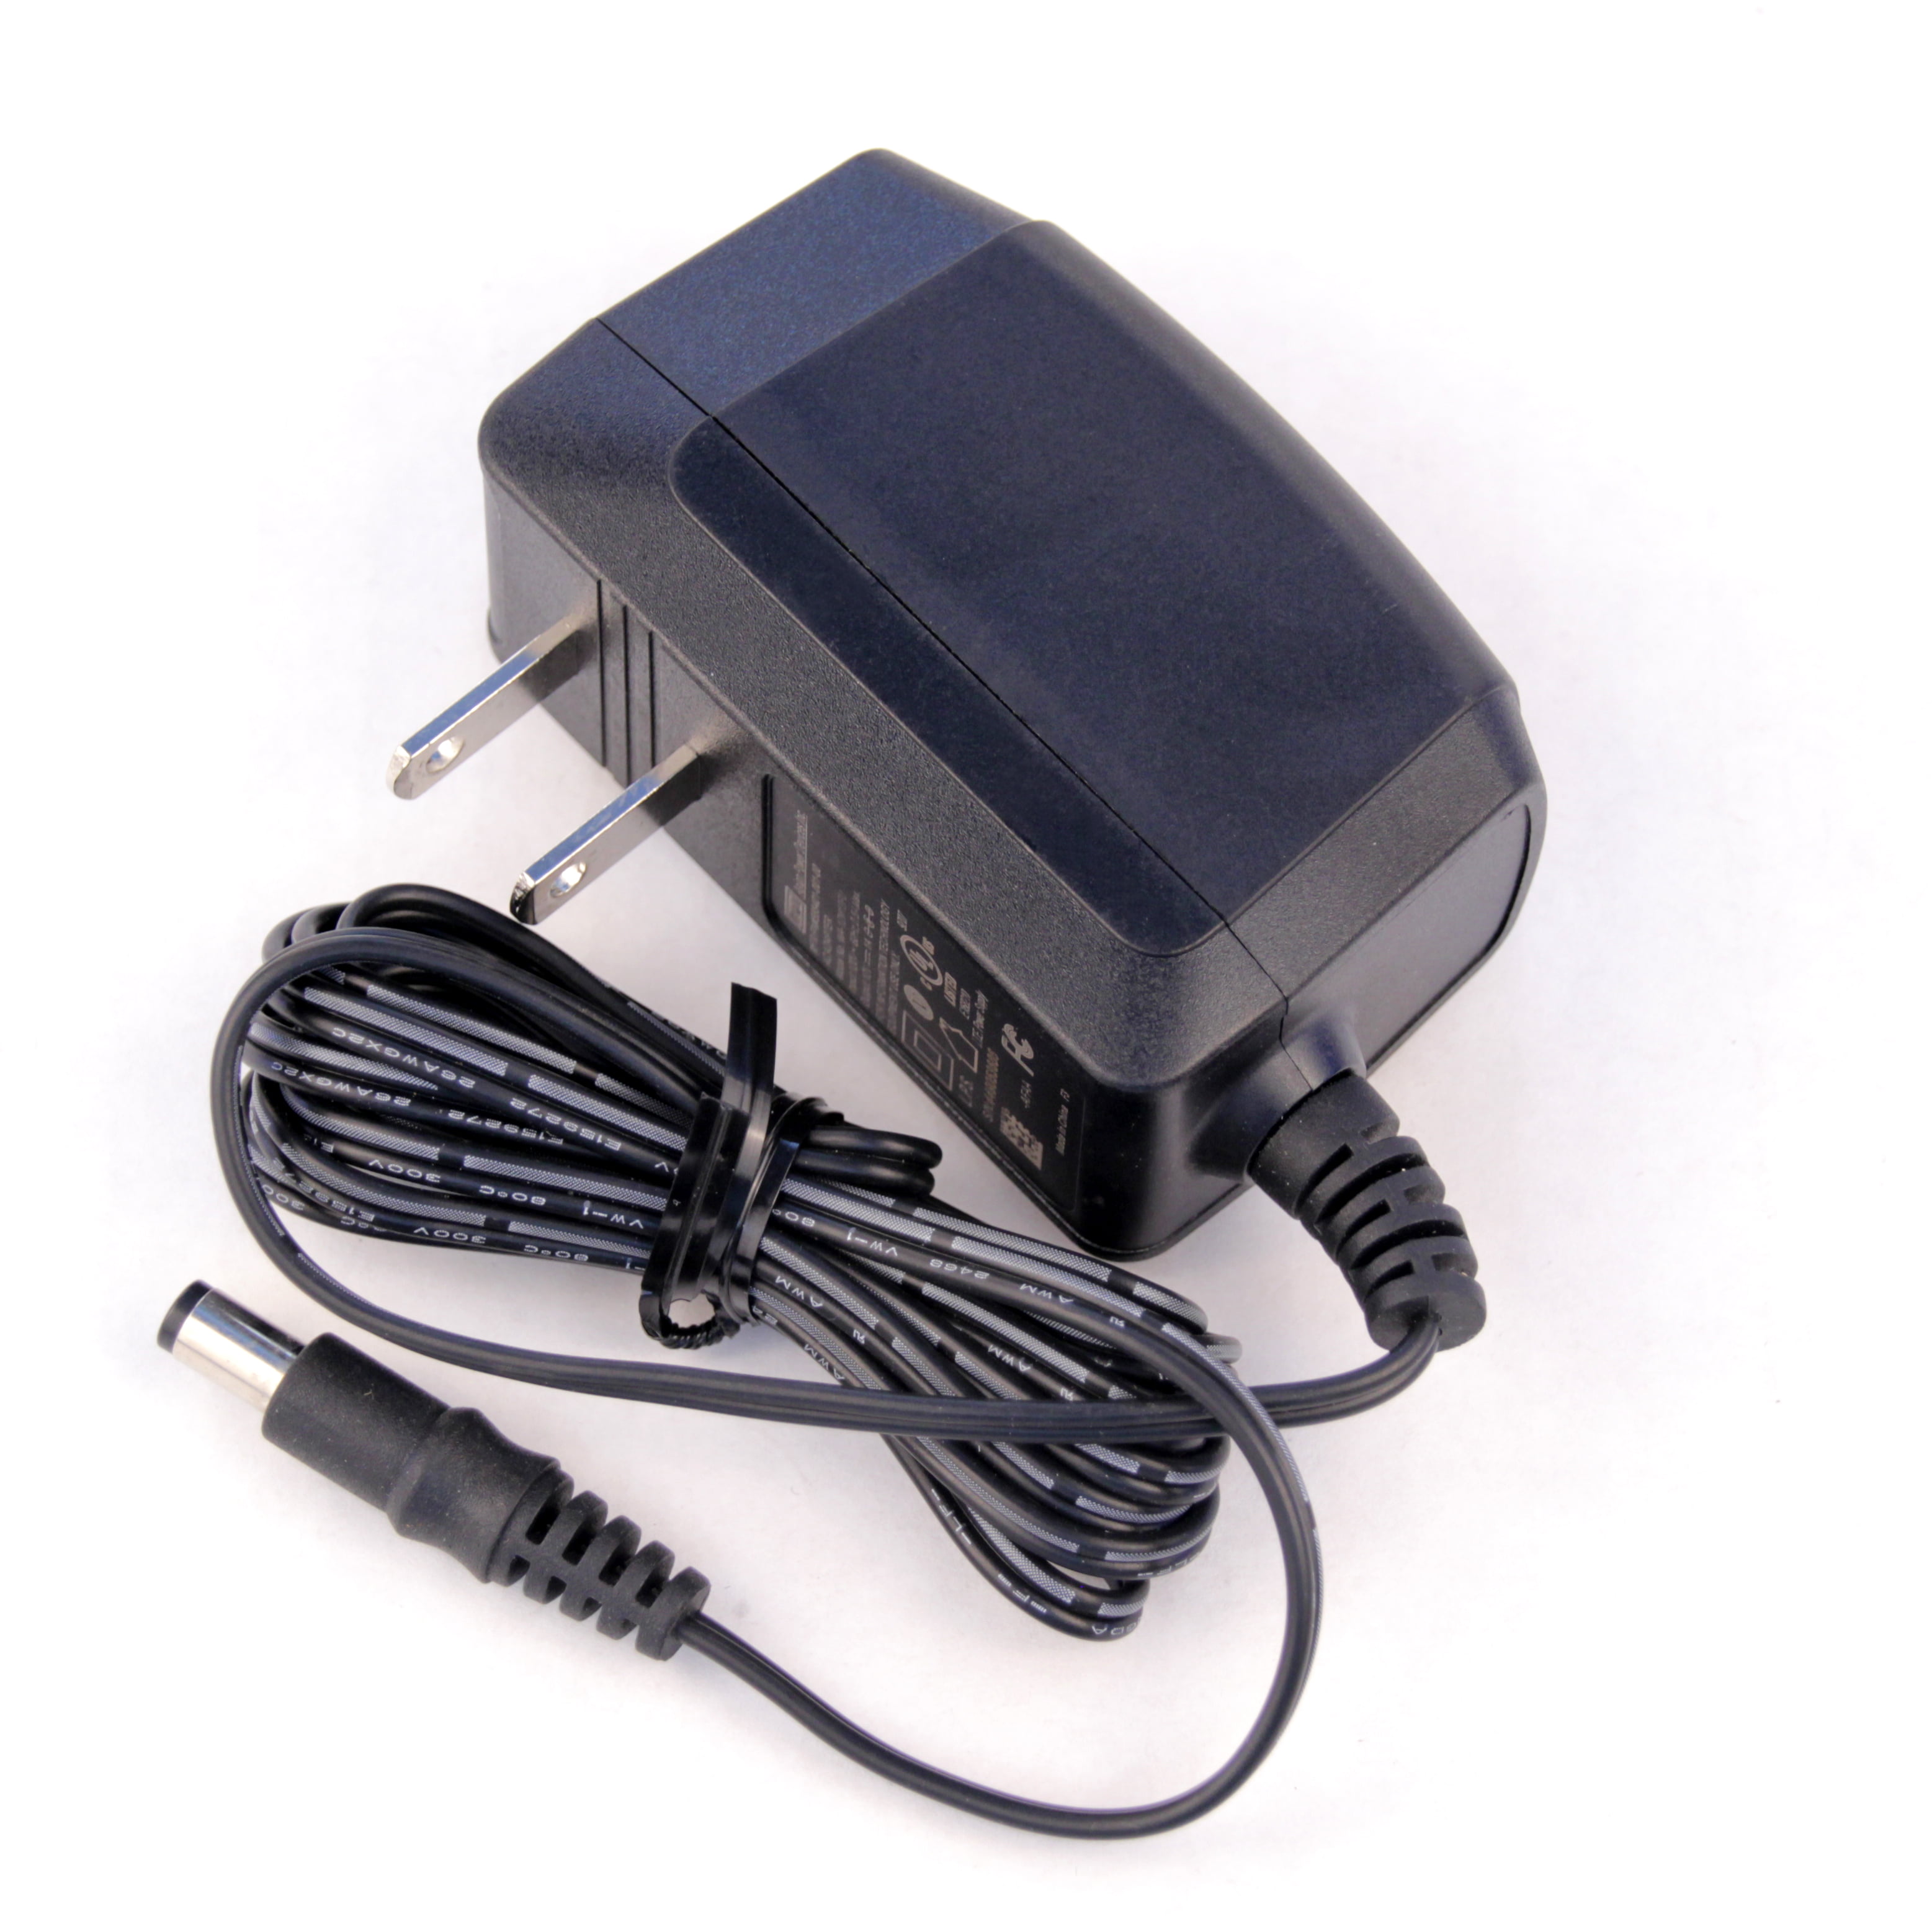 12 Volt Power Supply - 1 Amp Standard (12V 1A DC) 12W Adapter Connector